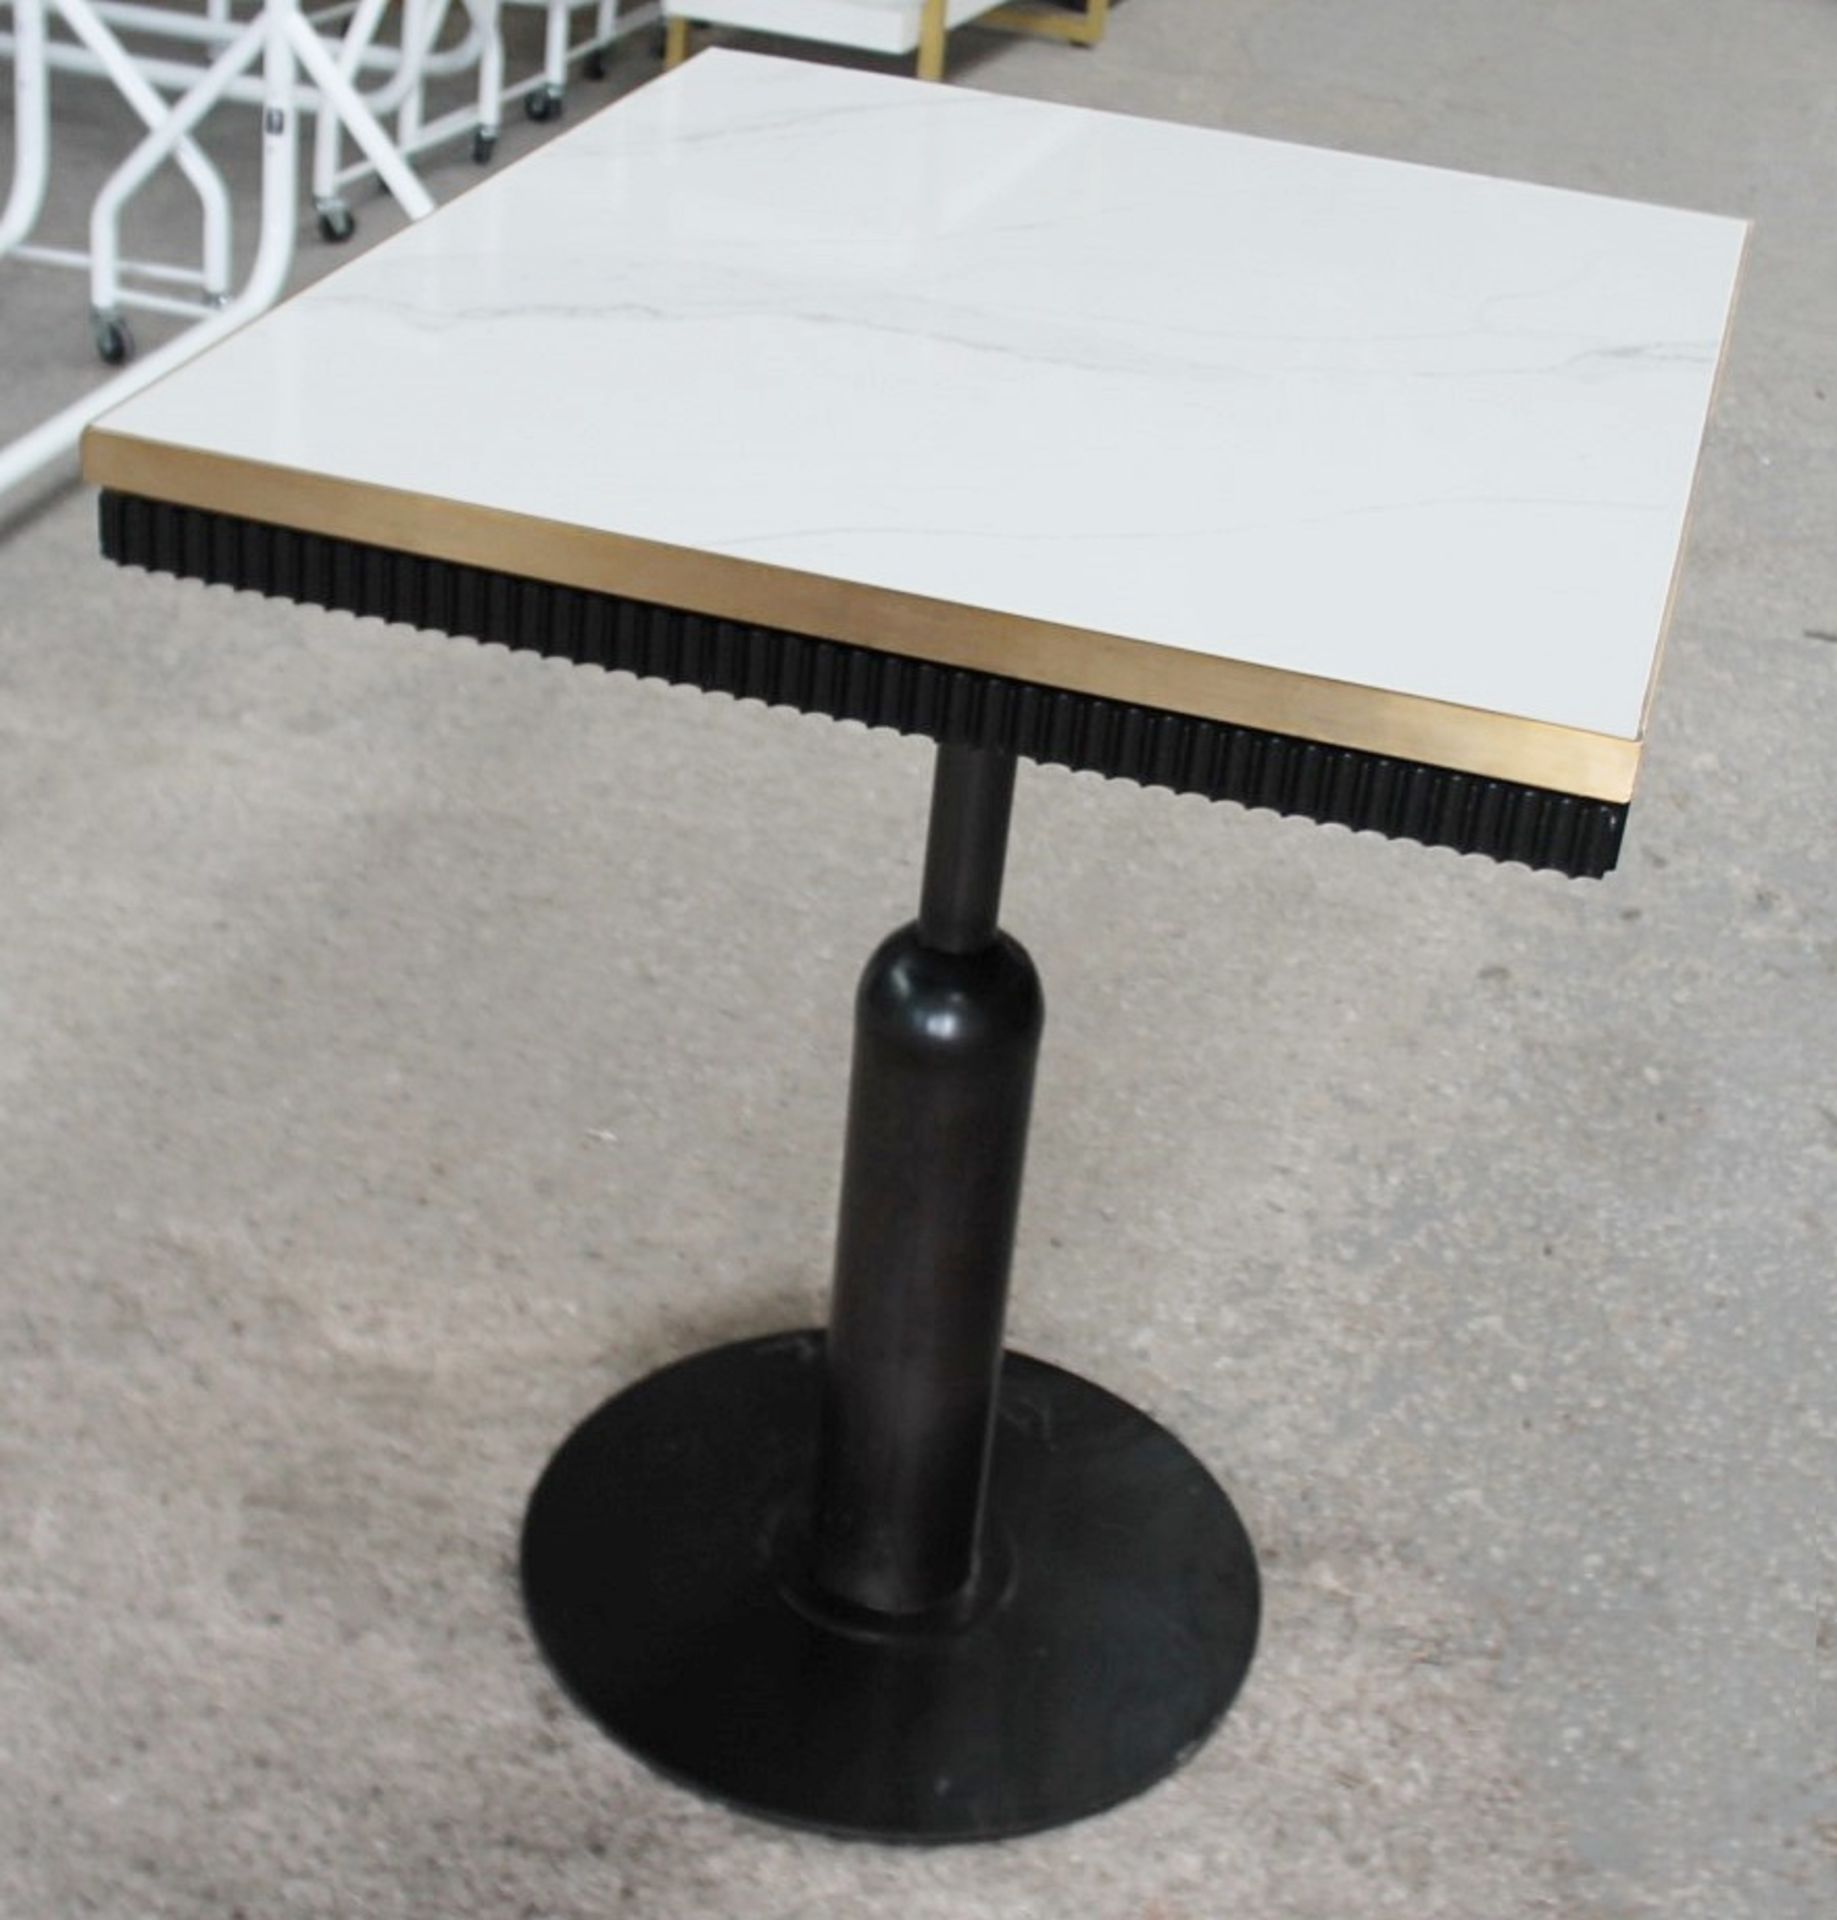 1 x Specially Commissioned Industrial-Style Marble-Topped Square Bistro Table With A Brass Trim - - Image 6 of 6